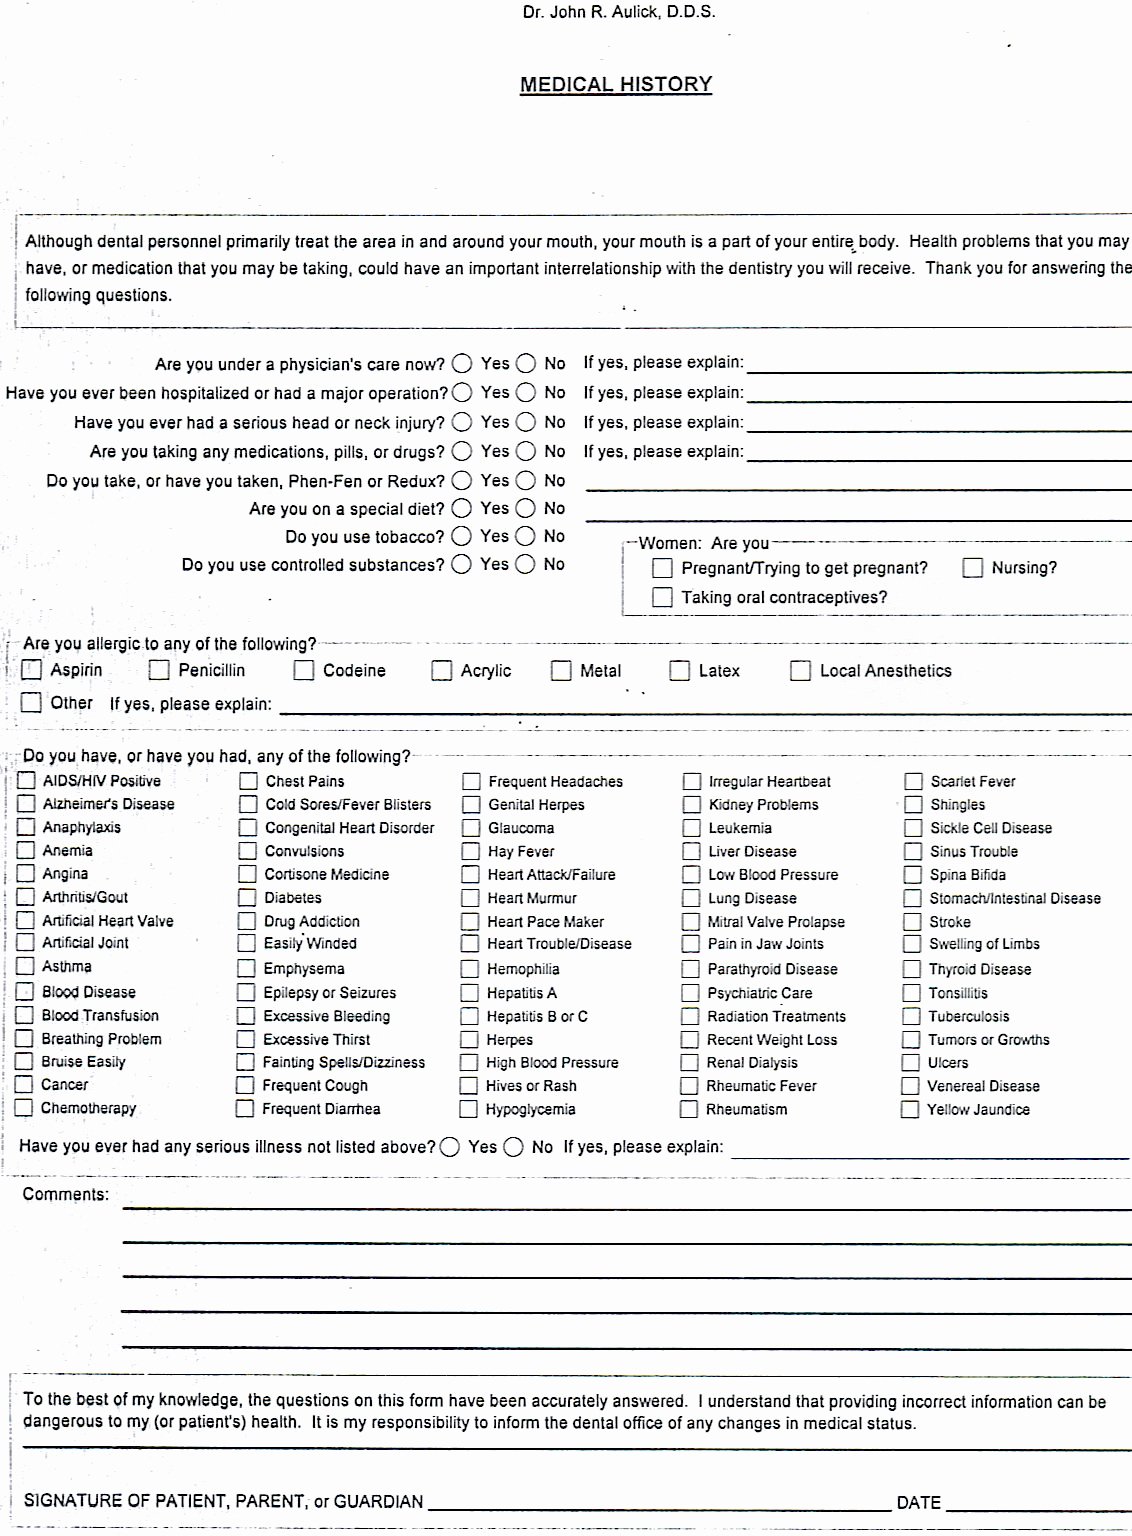 Dental Medical History form Template Luxury Dr John Aulick Dds